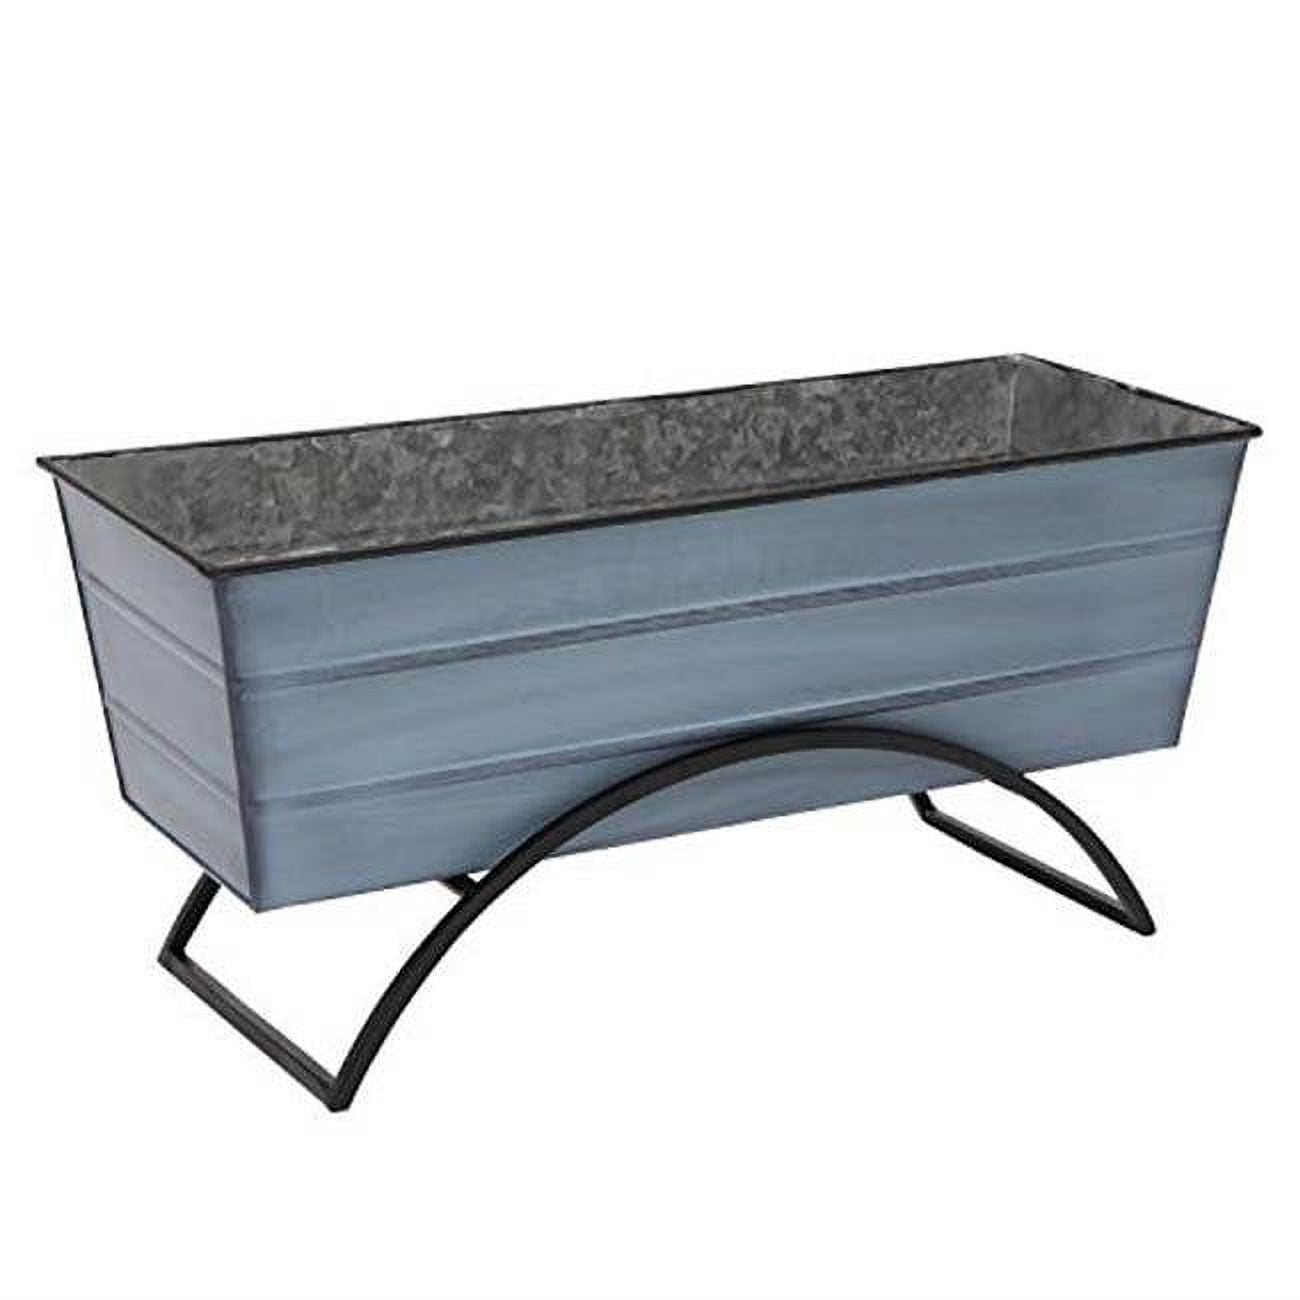 Achla C-20nb-s Odette Stand With Flower Box, Blue - Medium